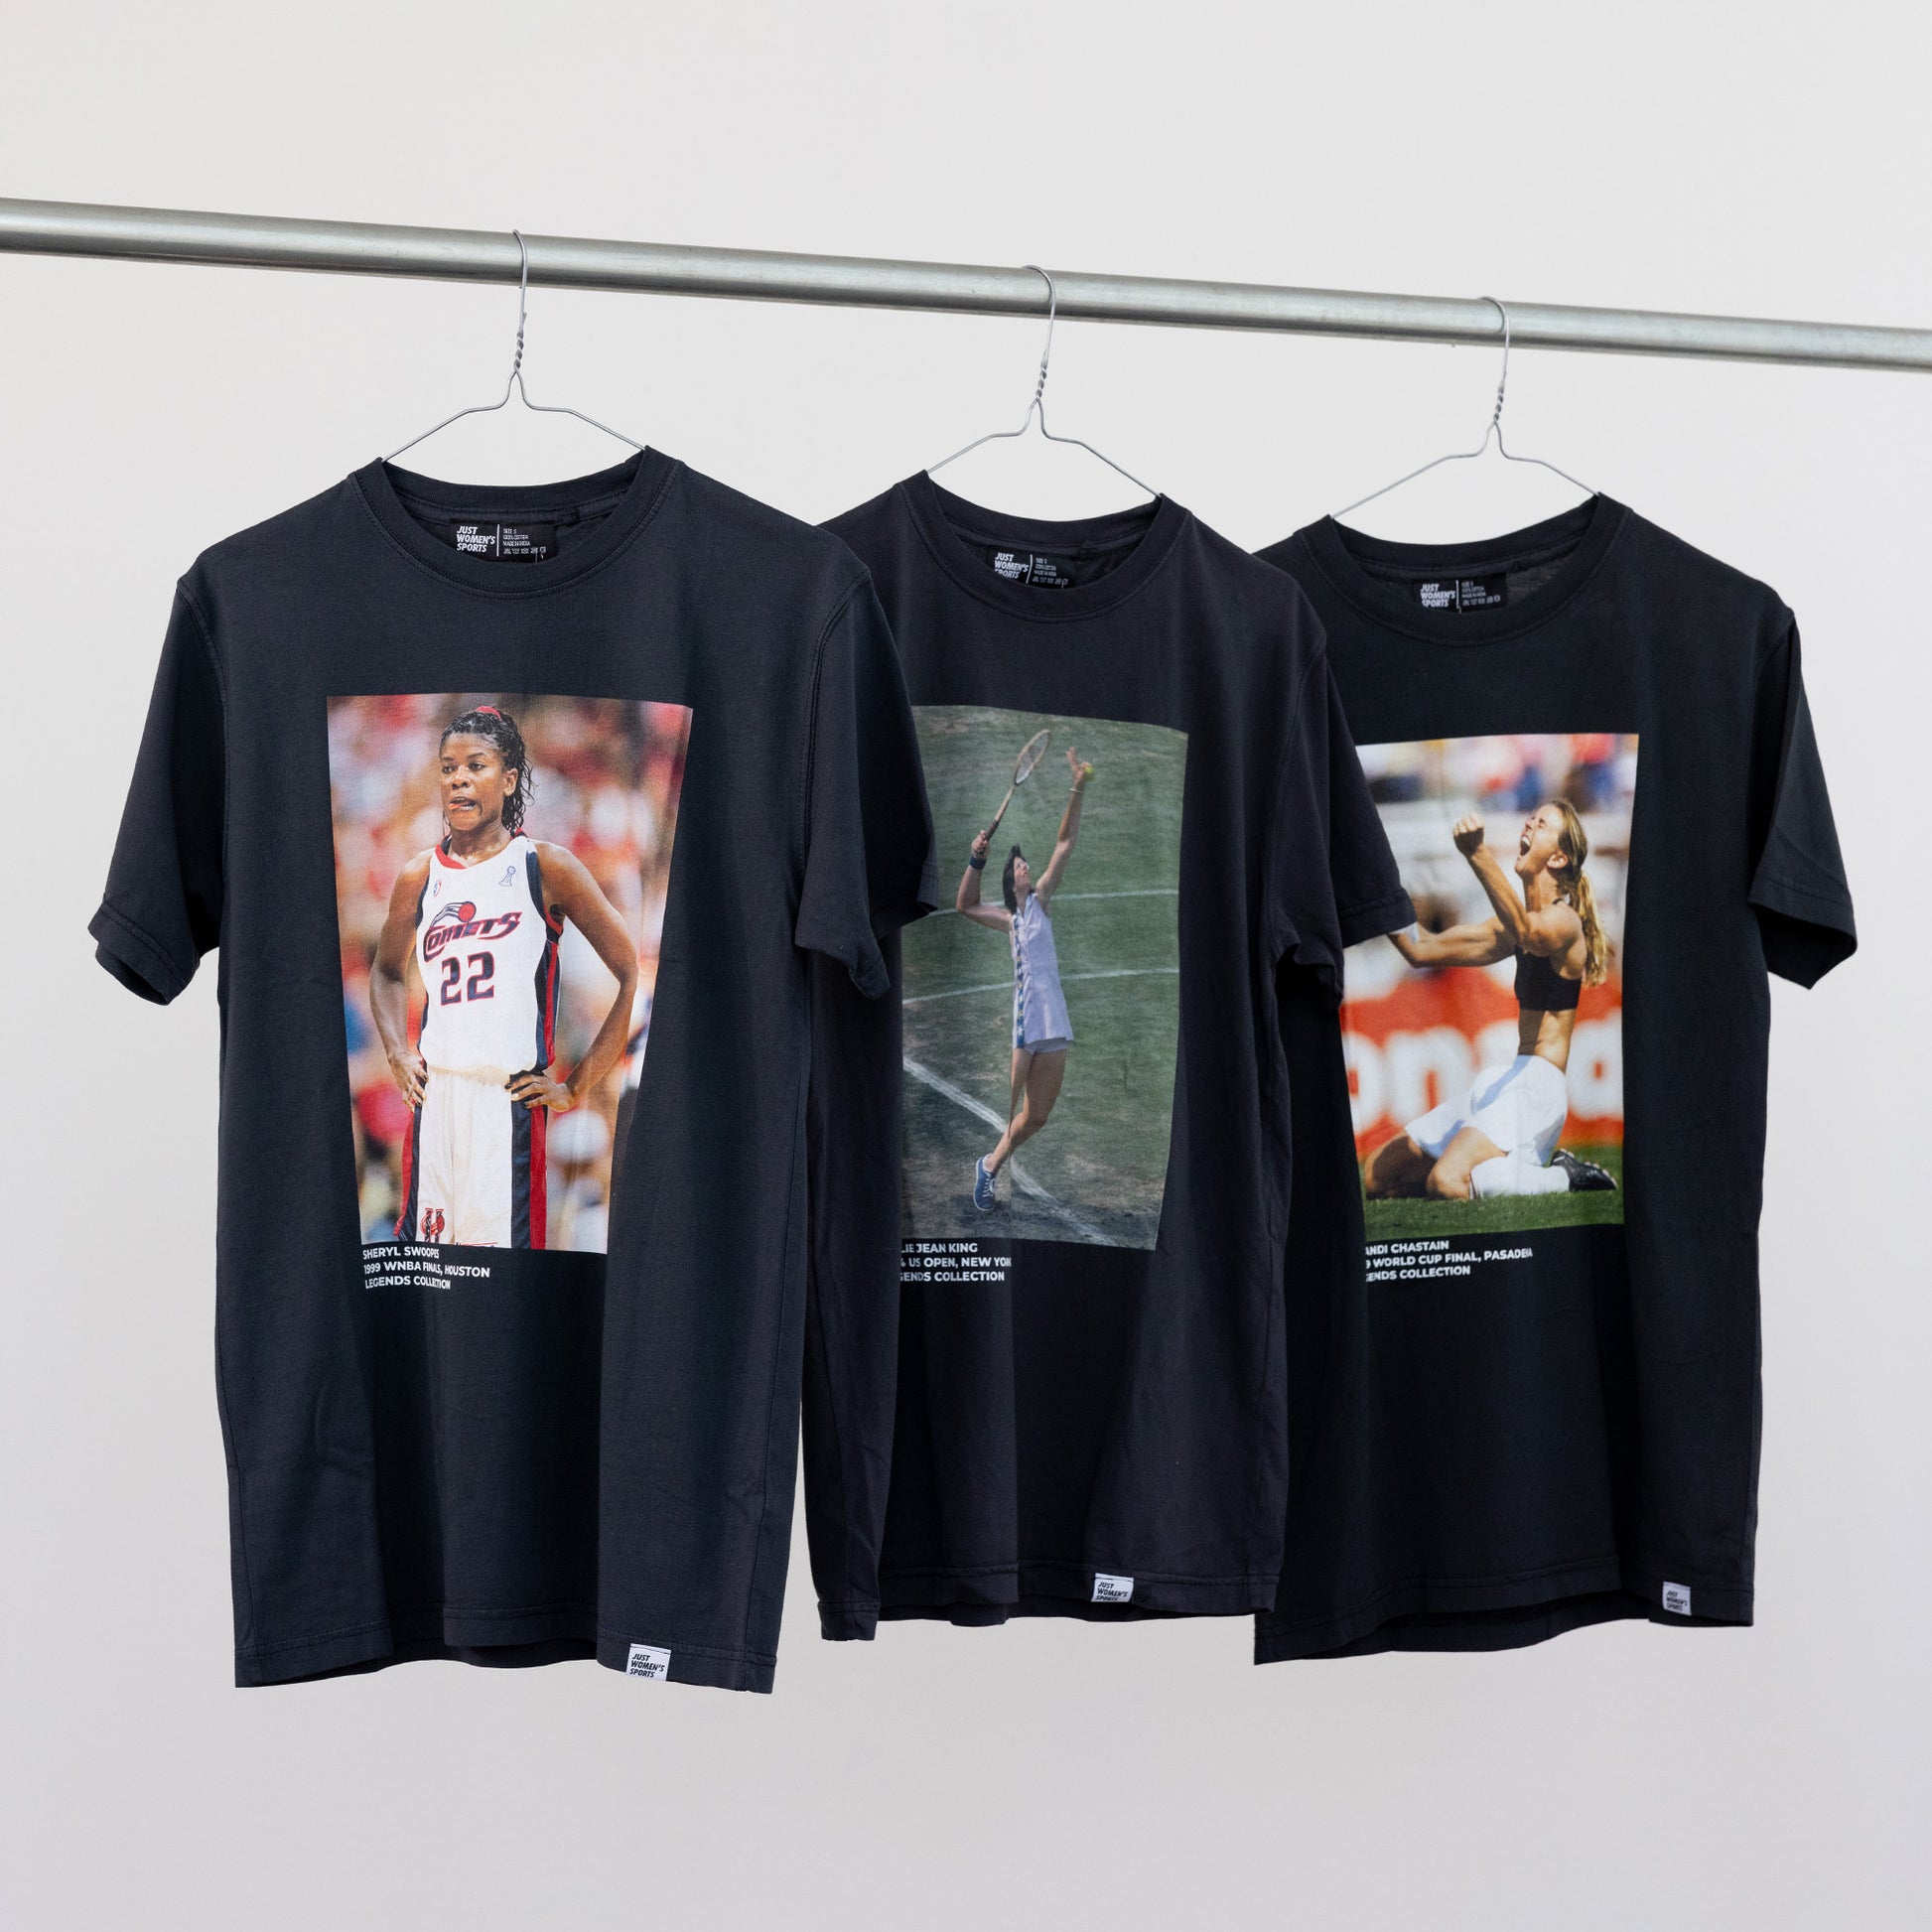 Sheryl Swoopes Legends Tee – Just Women's Sports